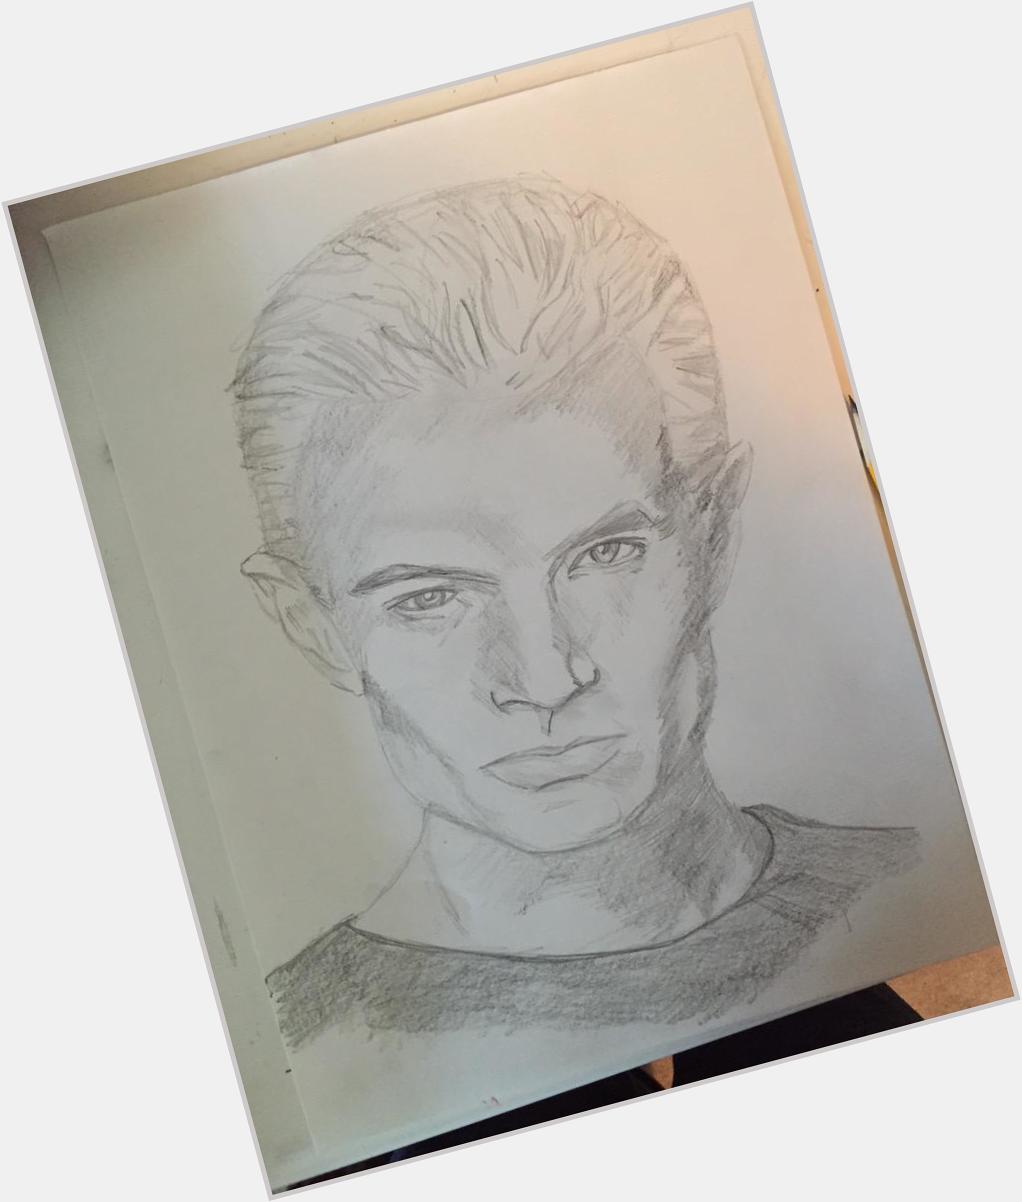 Happy Birthday James Marsters! Hope you like the drawing i did of you    